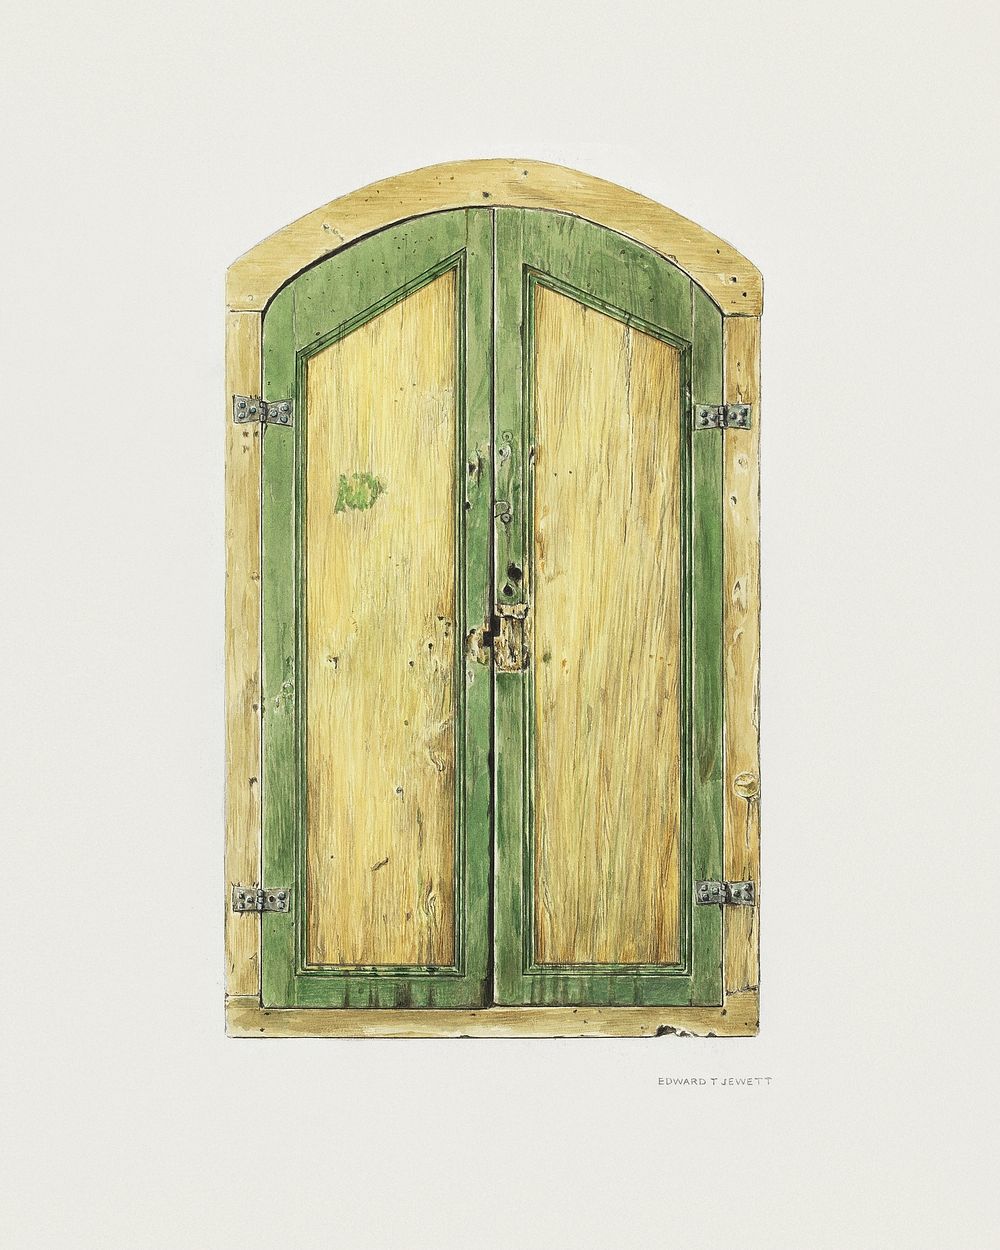 Painted Wooden Shutter (1937) by Edward Jewett. Original public domain image from the National Gallery of Art. Digitally…